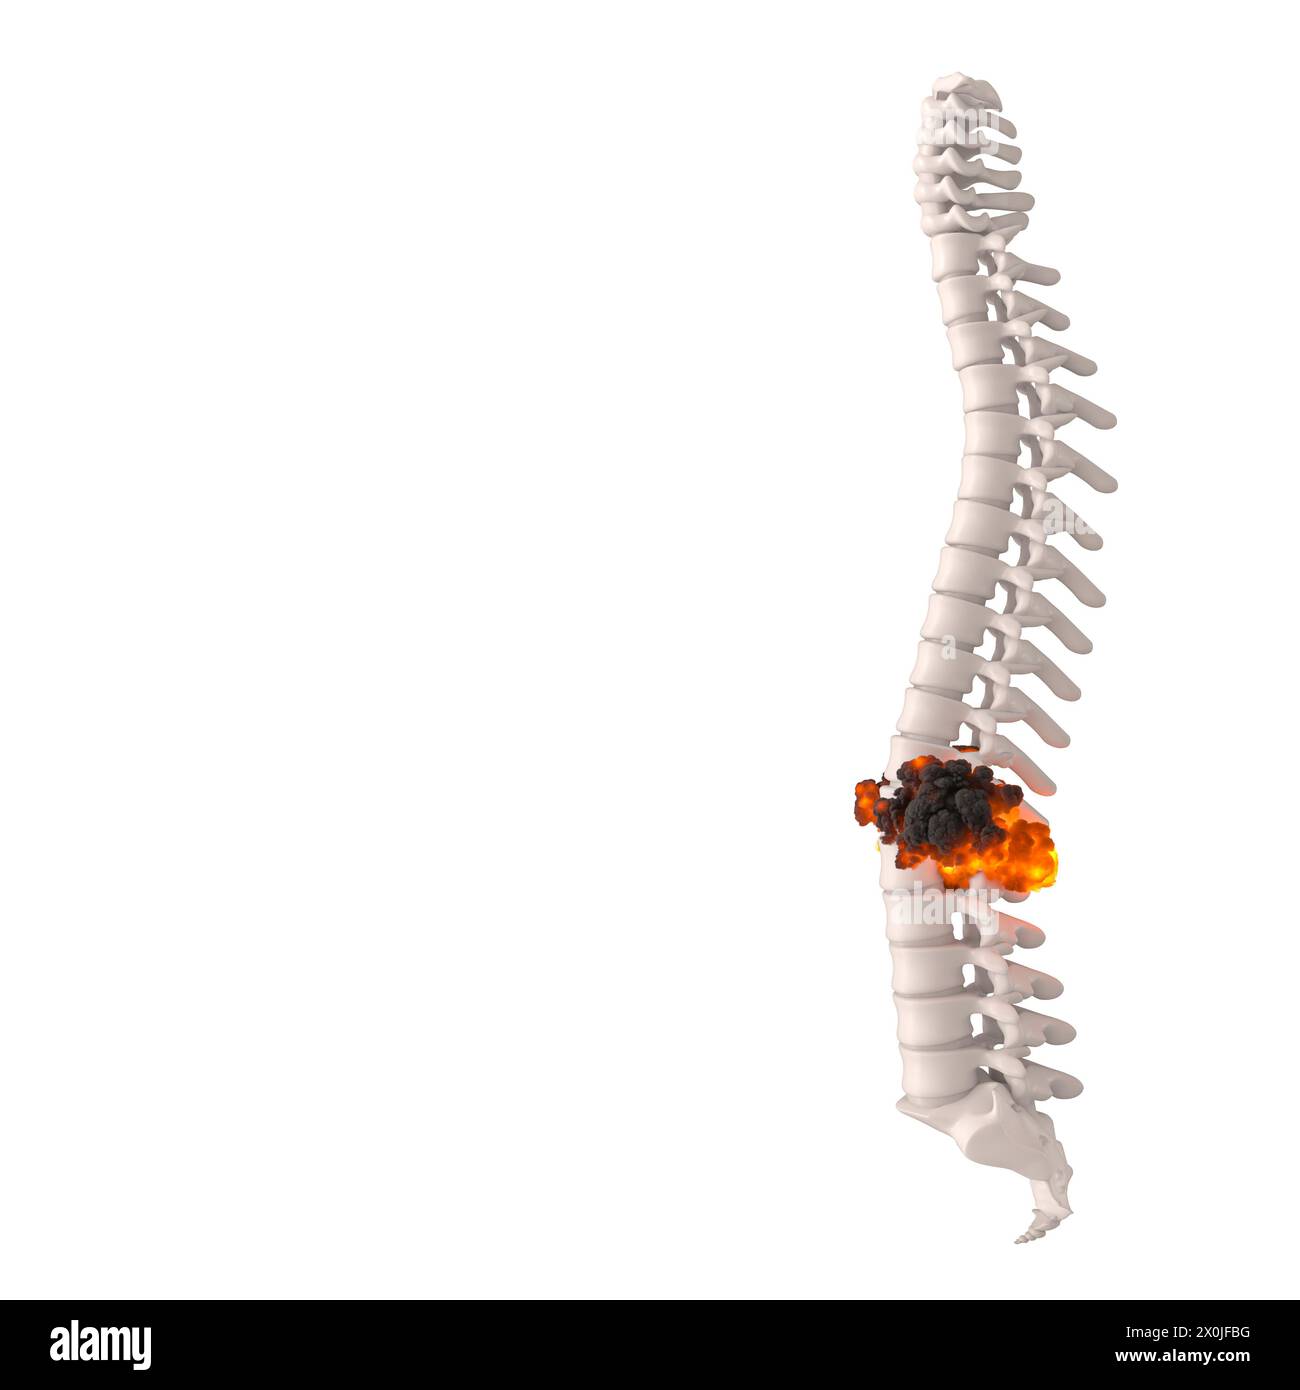 3d render of a human spine showing concept of disc herniation at lumbar vertebrae Stock Photo